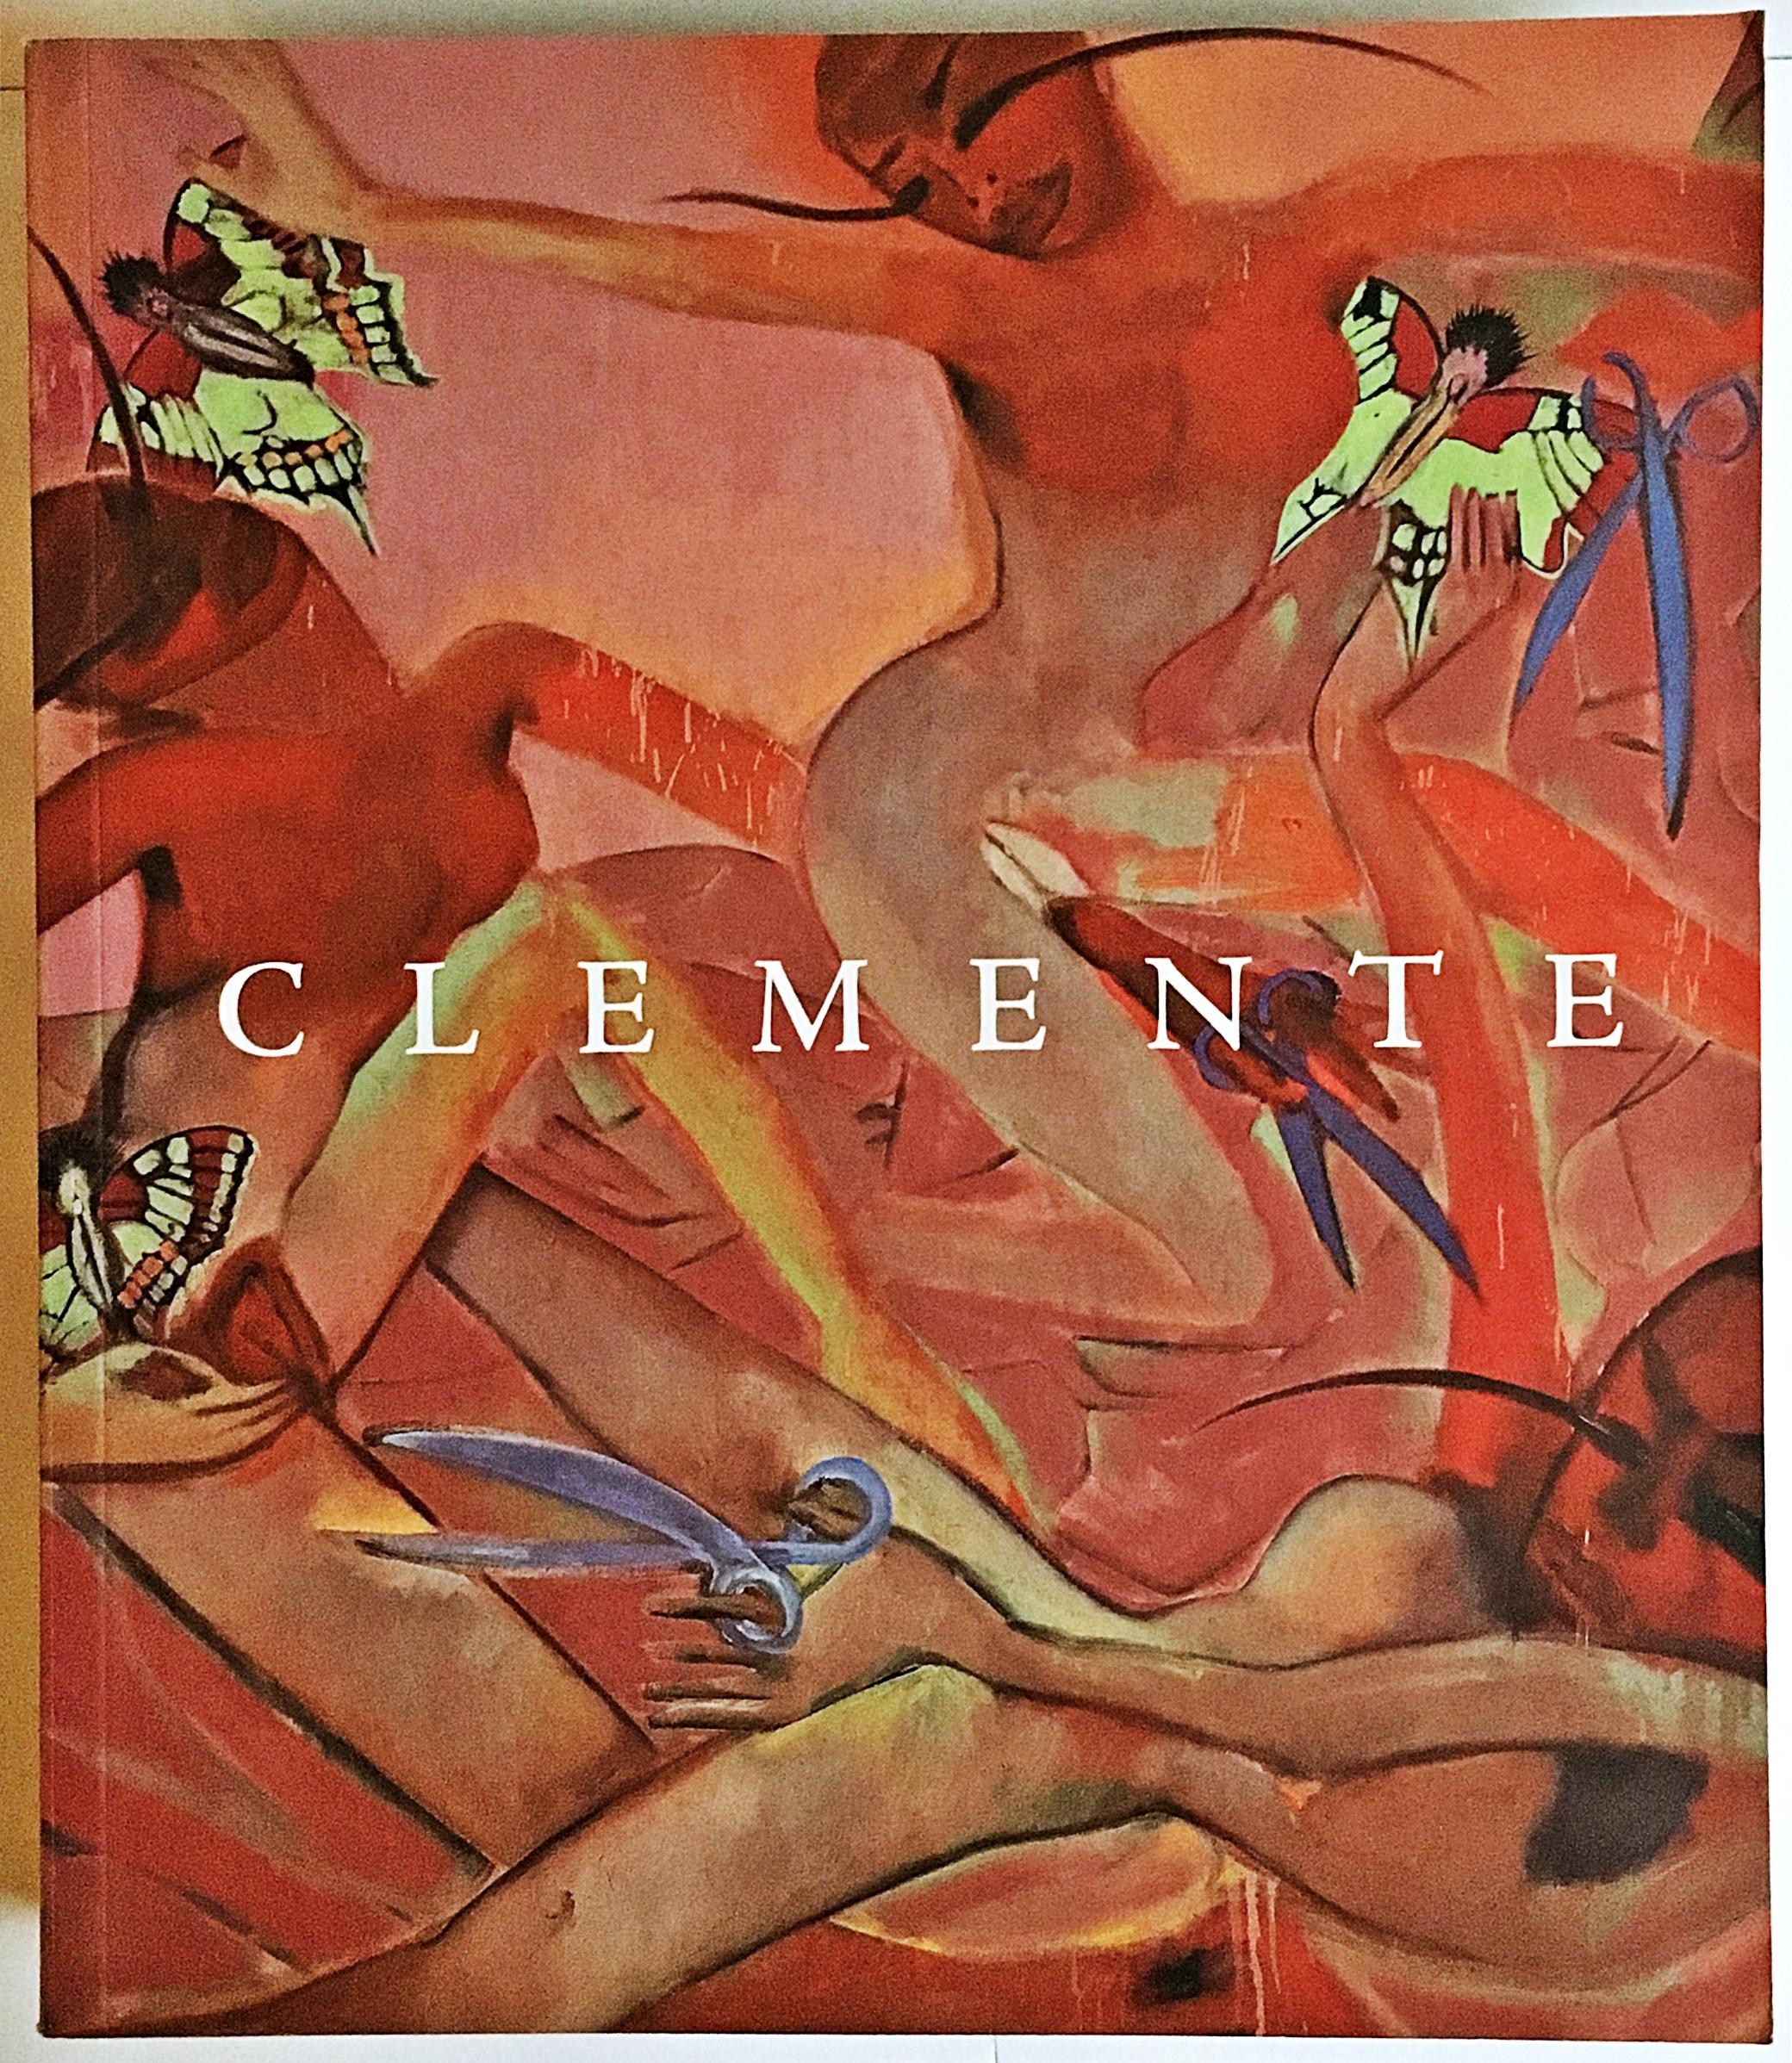 Francesco Clemente
Clemente (Hand Signed by Francesco Clemente and inscribed with a small drawing), 1998
Large Illustrated Softback Exhibition Catalogue. (Hand signed and inscribed to Richard Gombar by Francesco Clemente with a drawing